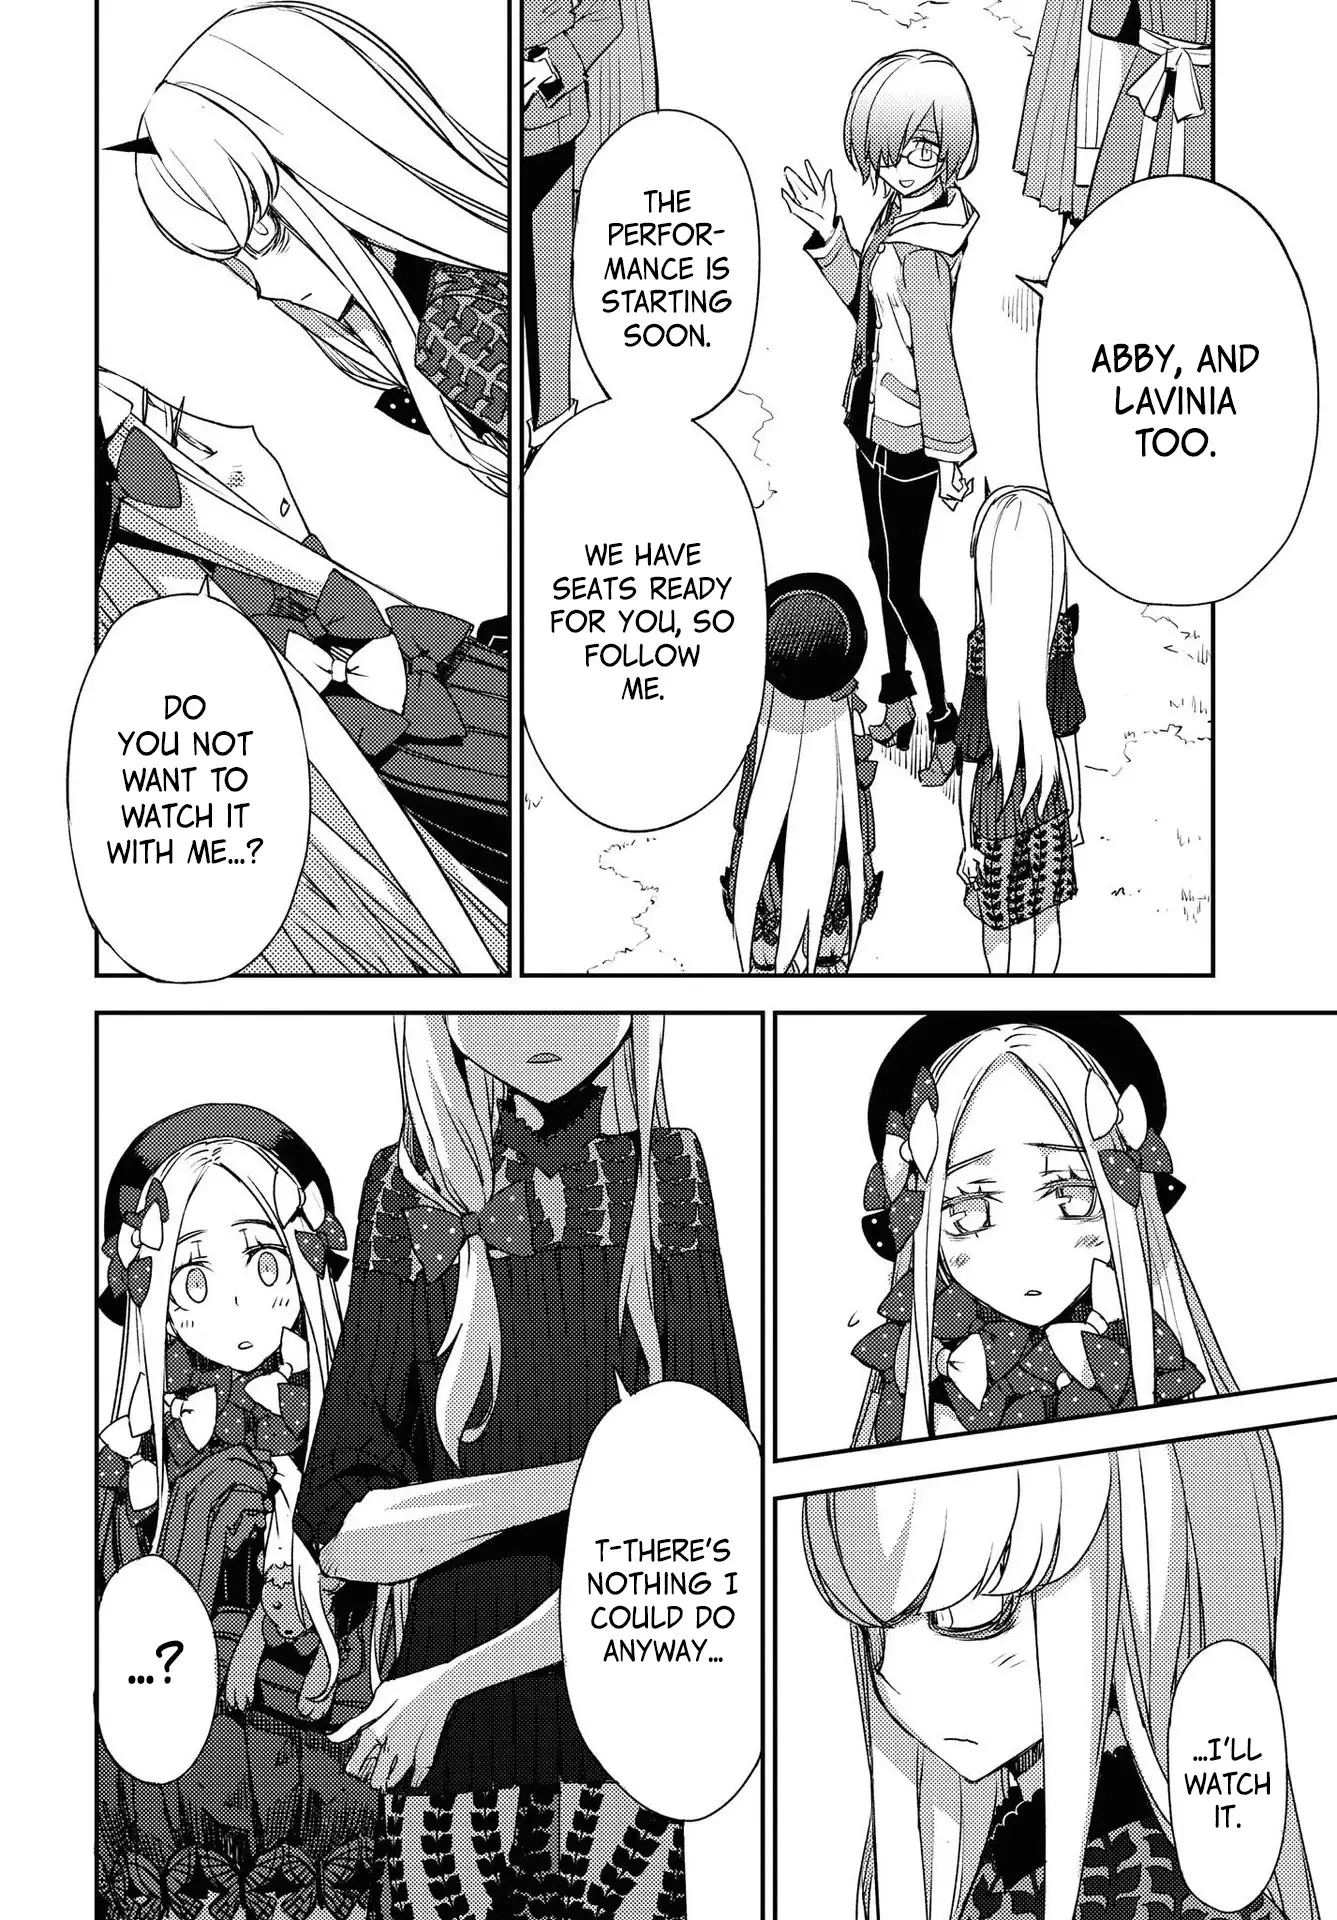 Fate/grand Order: Epic Of Remnant - Subspecies Singularity Iv: Taboo Advent Salem: Salem Of Heresy - 21 page 18-aaa219cb